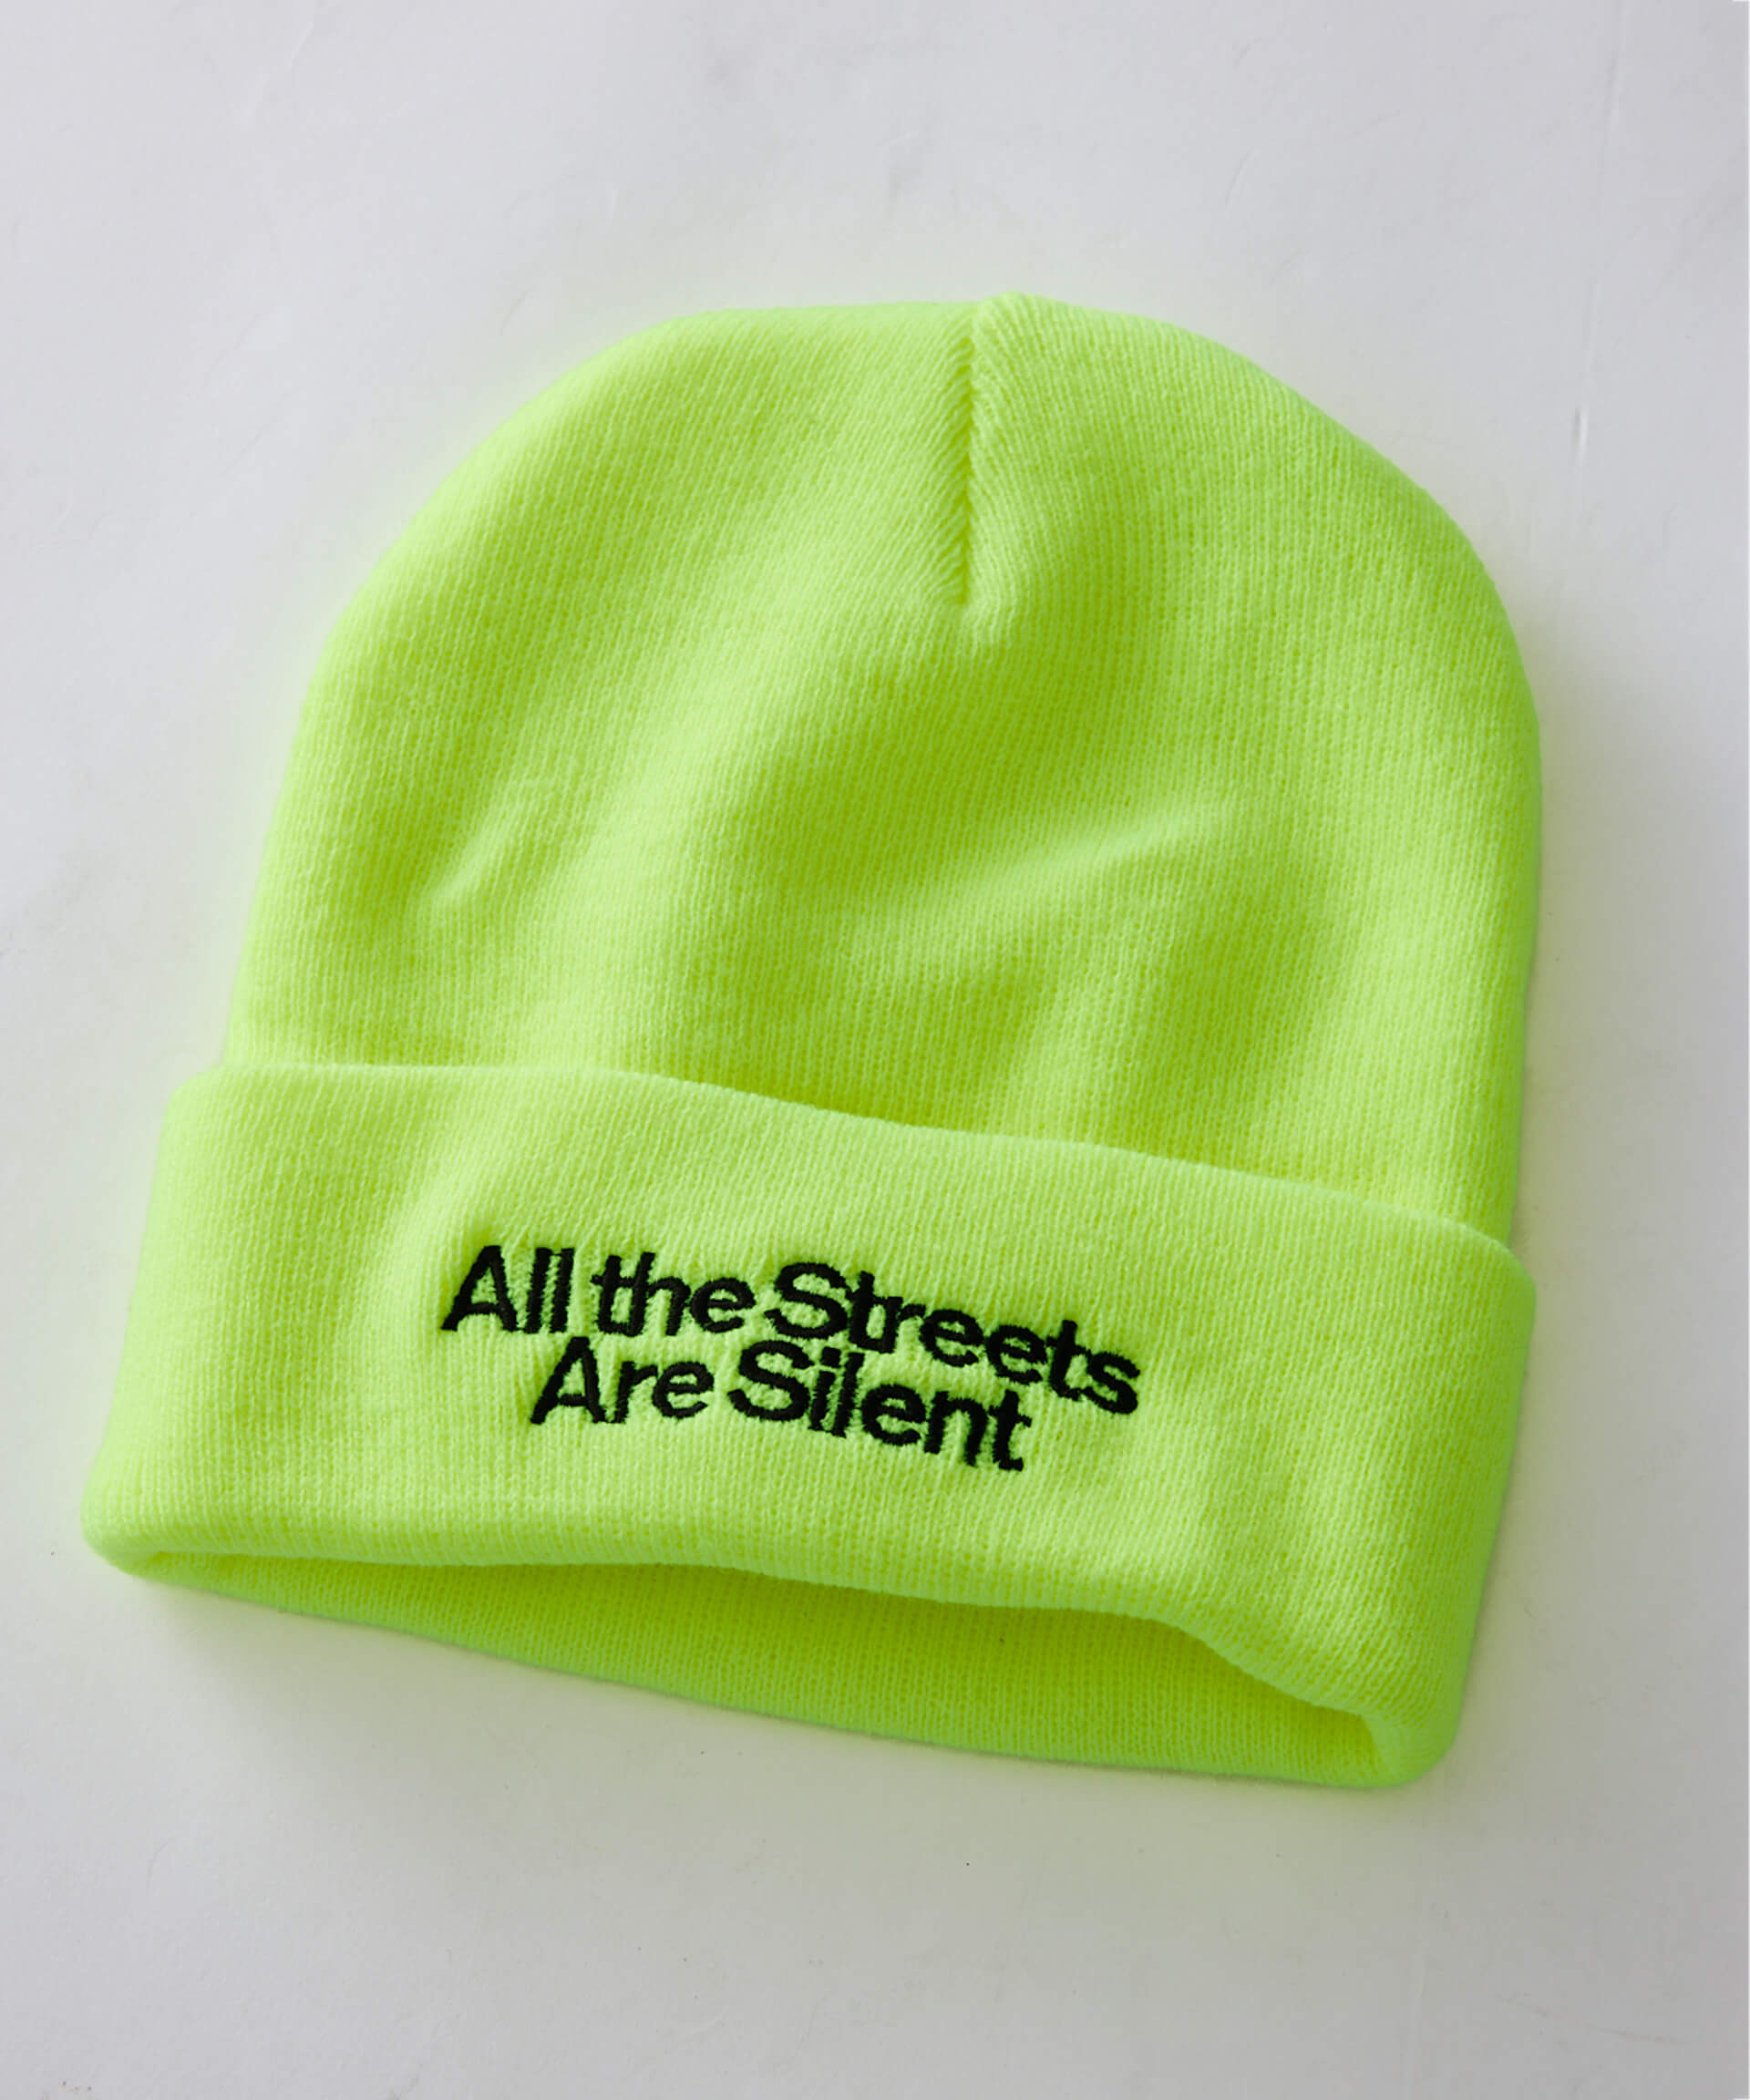 JOURNAL STANDARDと映画『All the Streets Are Silent』のコラボアイテムが登場 fashion221025-journalstandard7